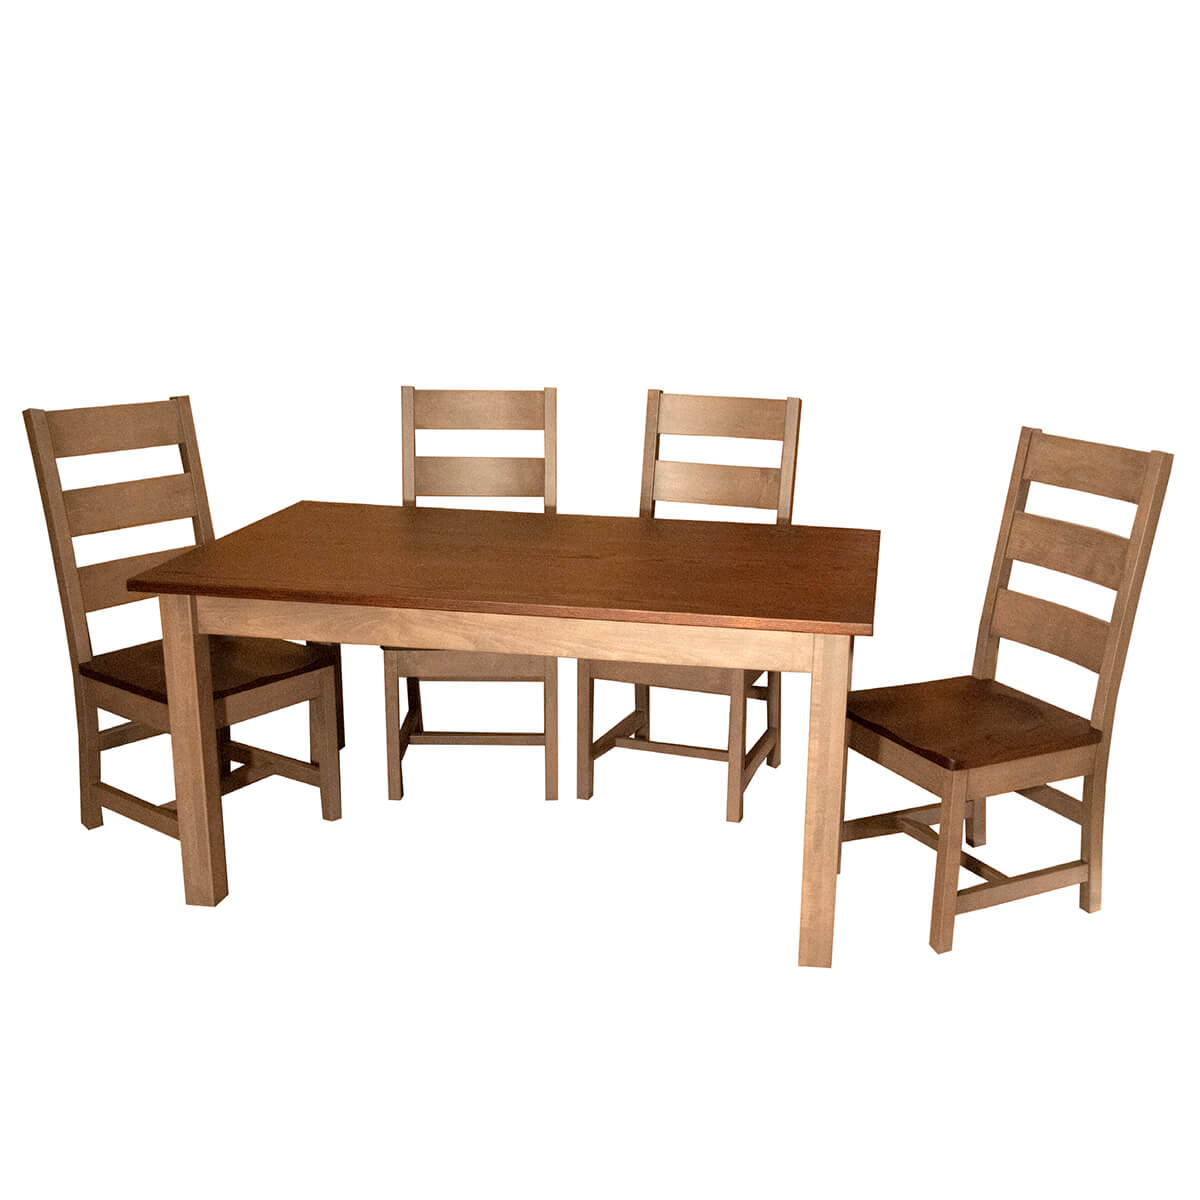 Read more about the article Millcreek Dining Collection